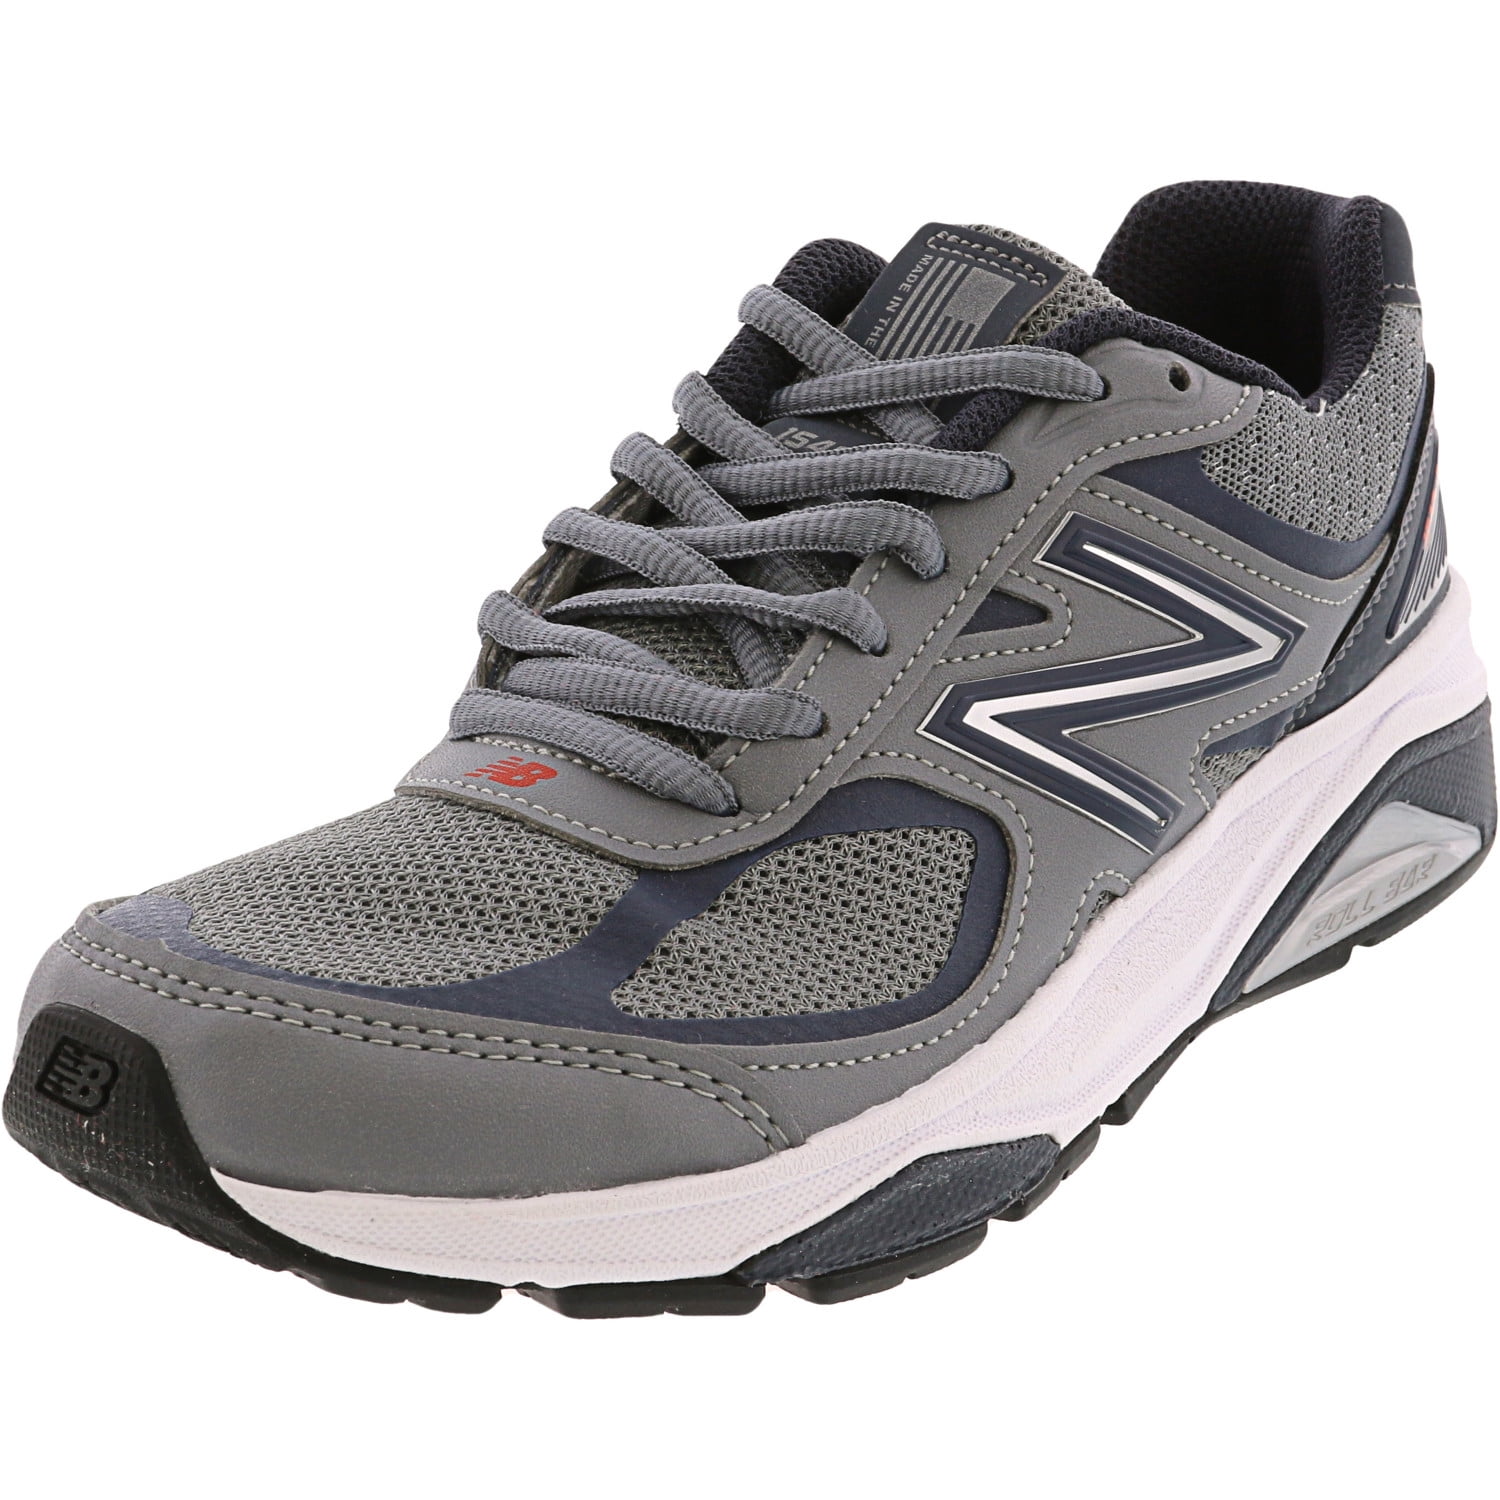 W1540 Gd3 Ankle-High Running - 5.5WWW 